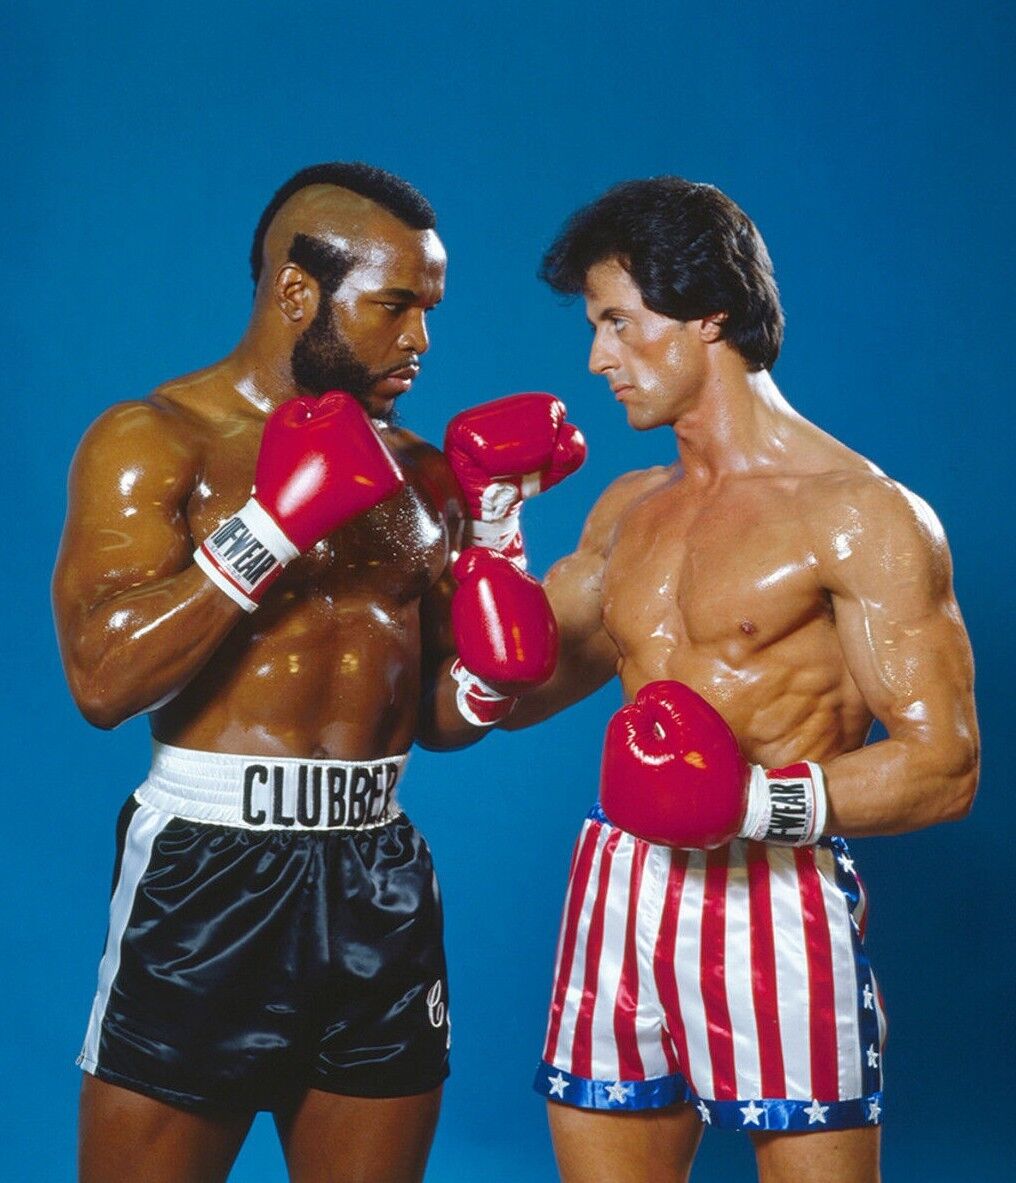 SYLVESTER STALLONE MR. T ROCKY III Balboa Boxing Movie Picture Photo 4\